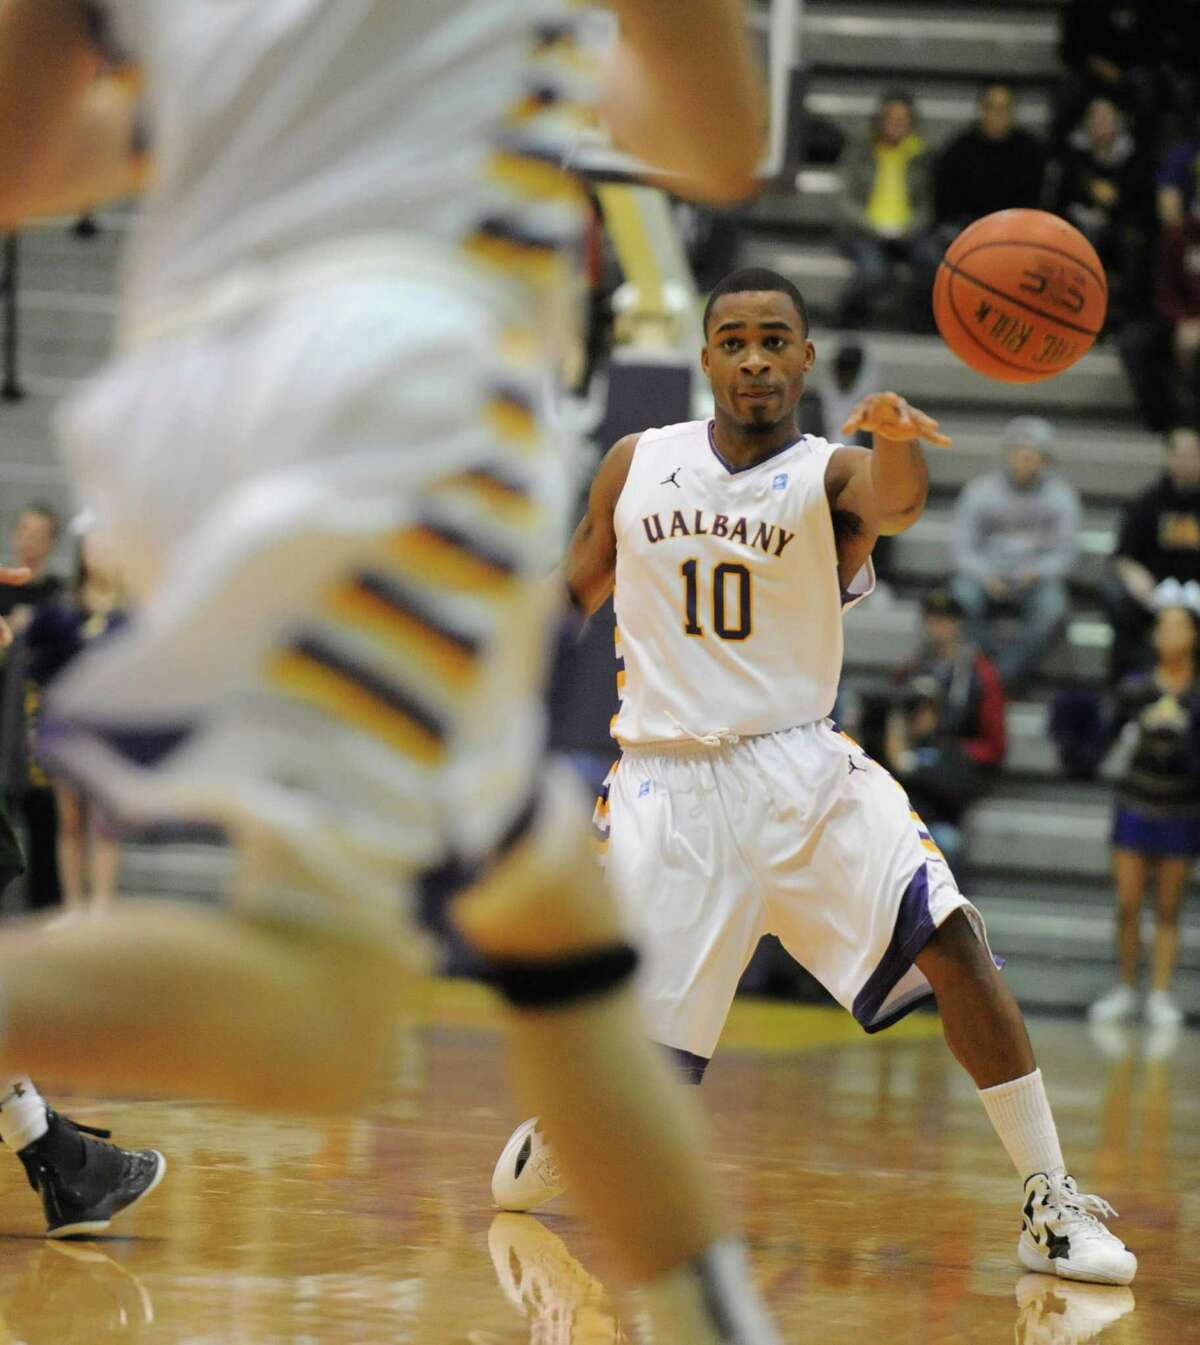 UAlbany's Mike Black passes the ball during a basketball game against Wagner at the SEFCU Arena Monday, Nov. 26, 2012 in Albany, N.Y. (Lori Van Buren / Times Union)